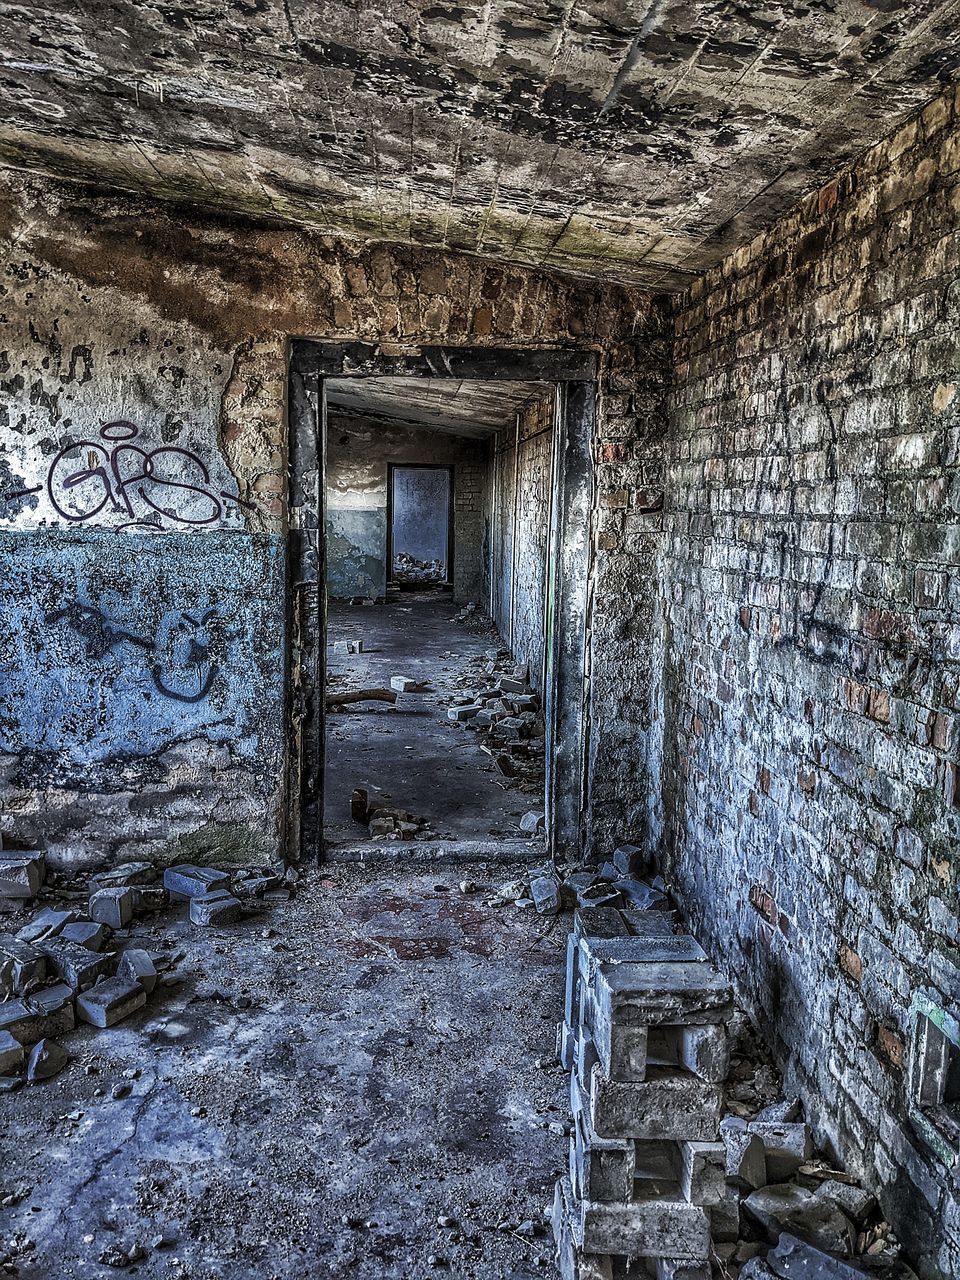 architecture, ruins, built structure, abandoned, wall, ancient history, building, no people, old, urban area, wall - building feature, damaged, history, indoors, rundown, decline, deterioration, day, bad condition, the past, weathered, entrance, ruined, door, window, old ruin, house, dirt, wood, ceiling, rock